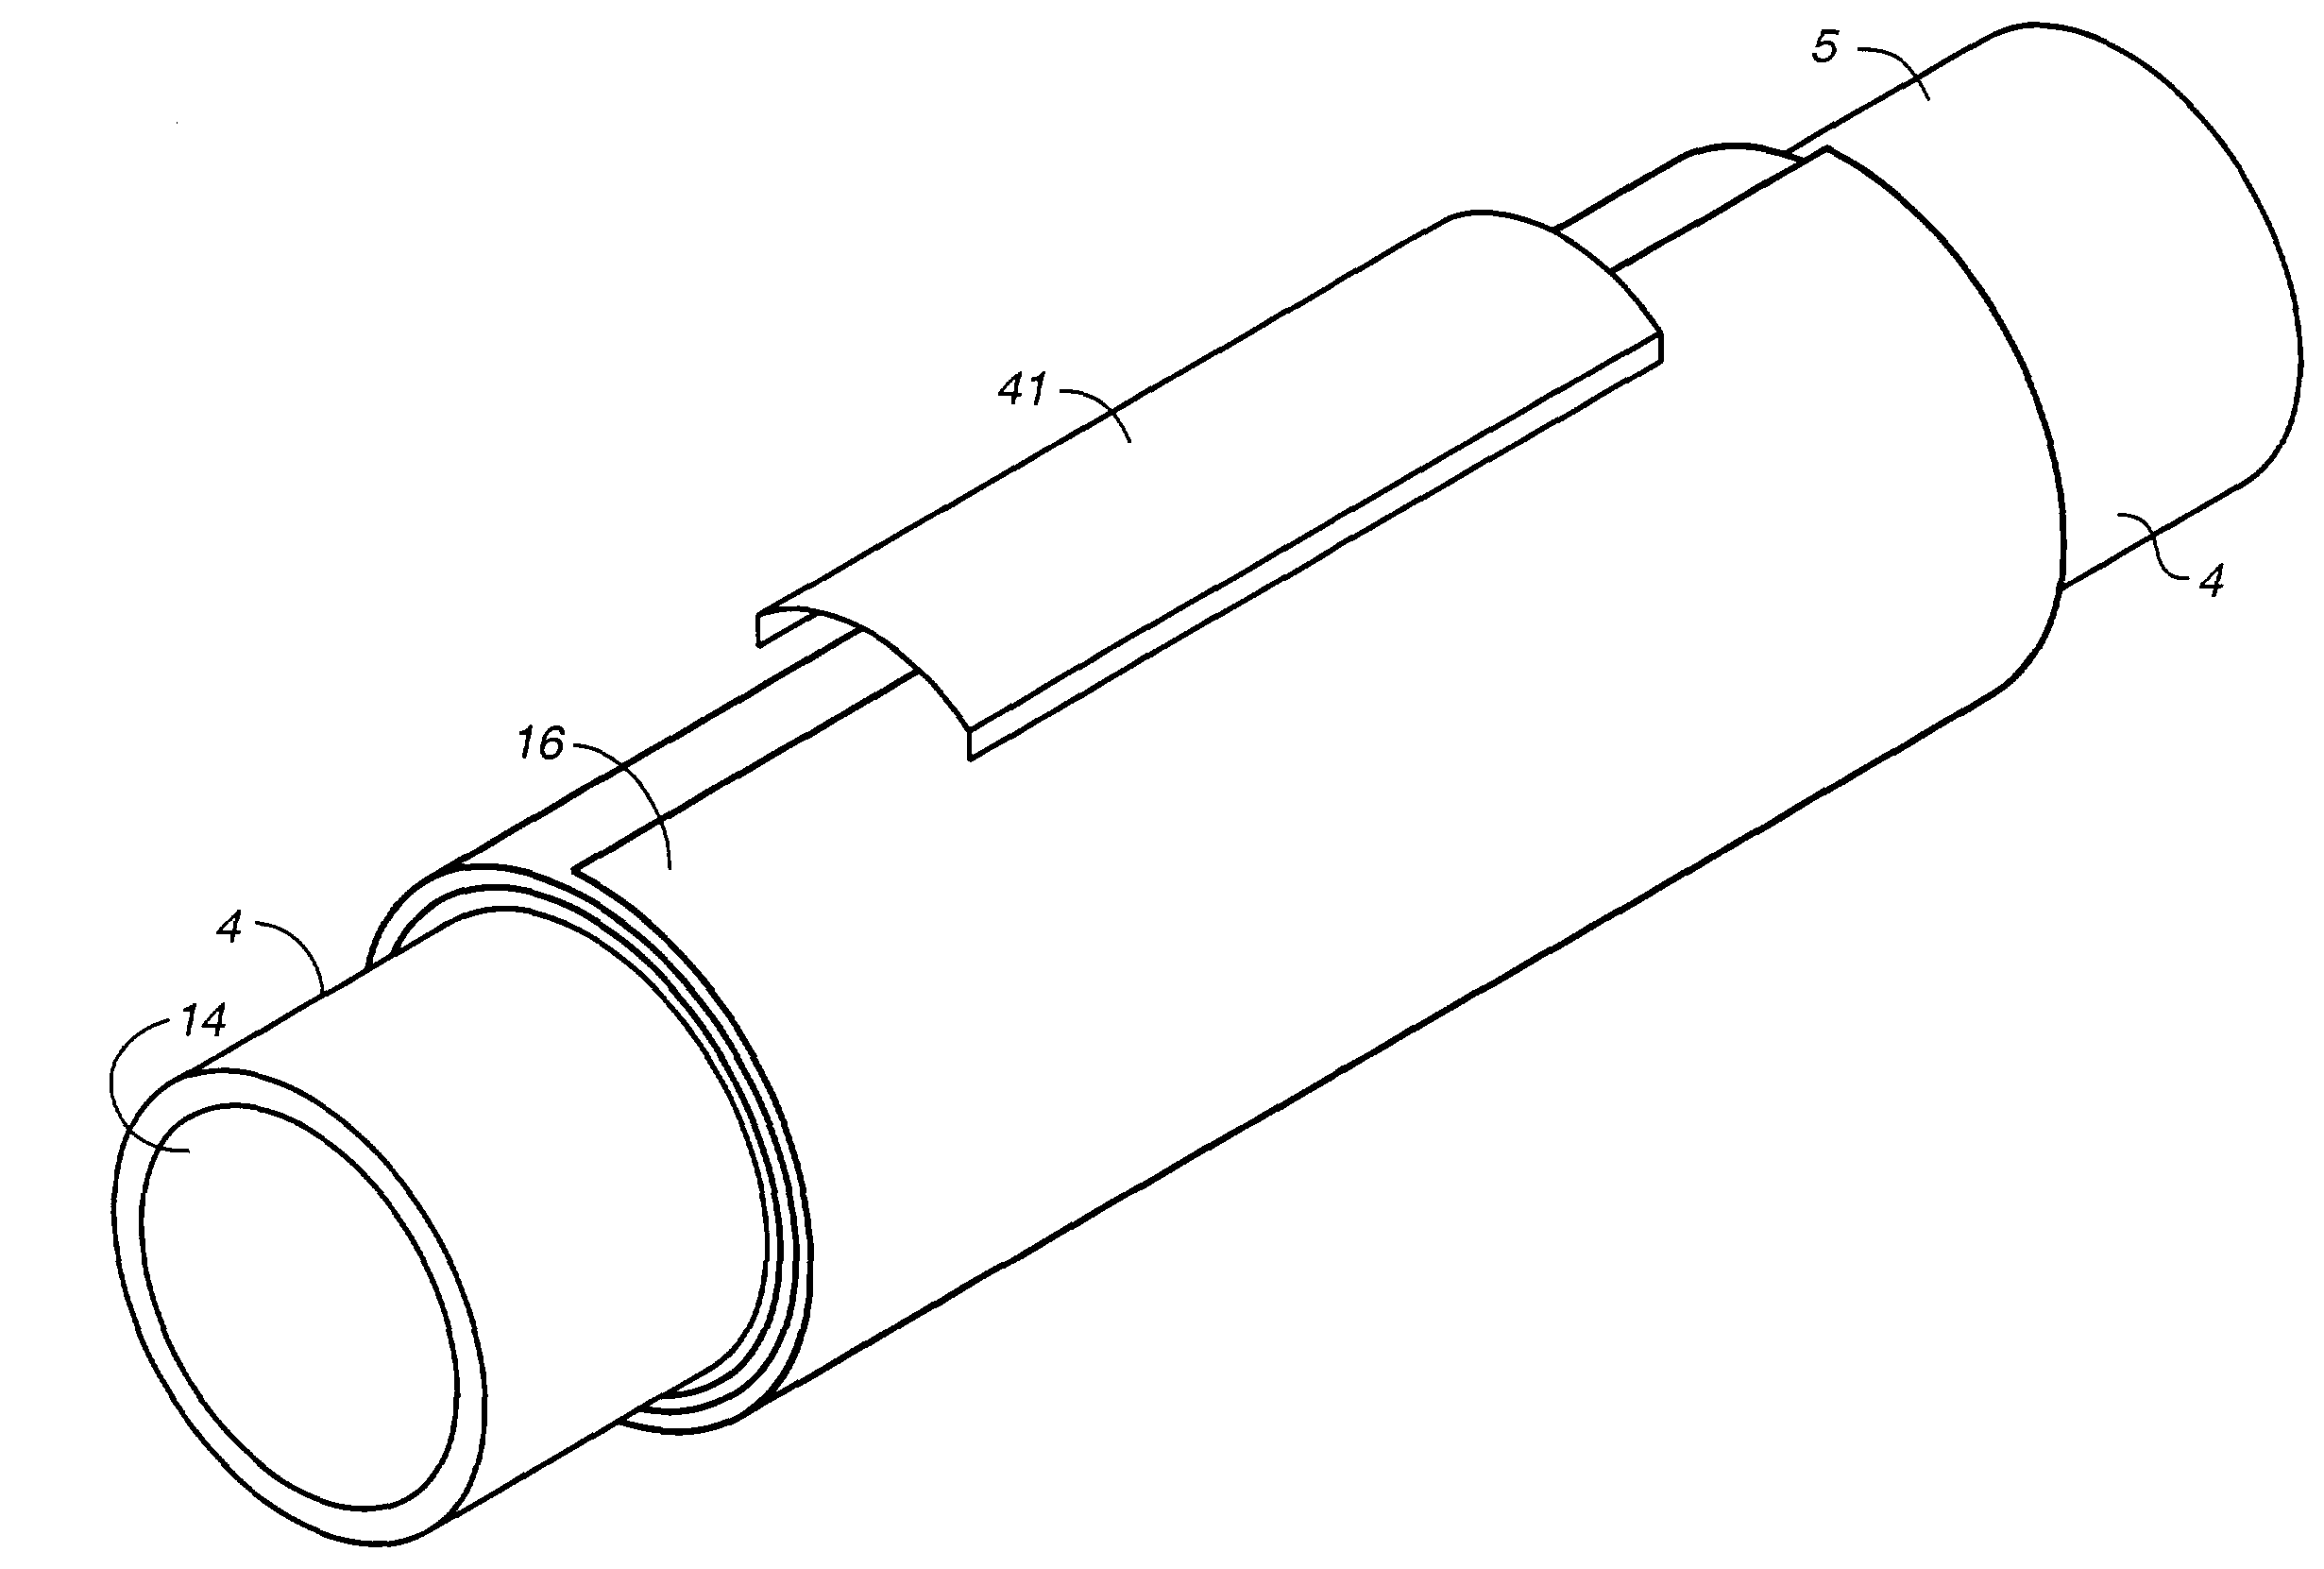 Tissue engineered blood vessels and apparatus for their manufacture